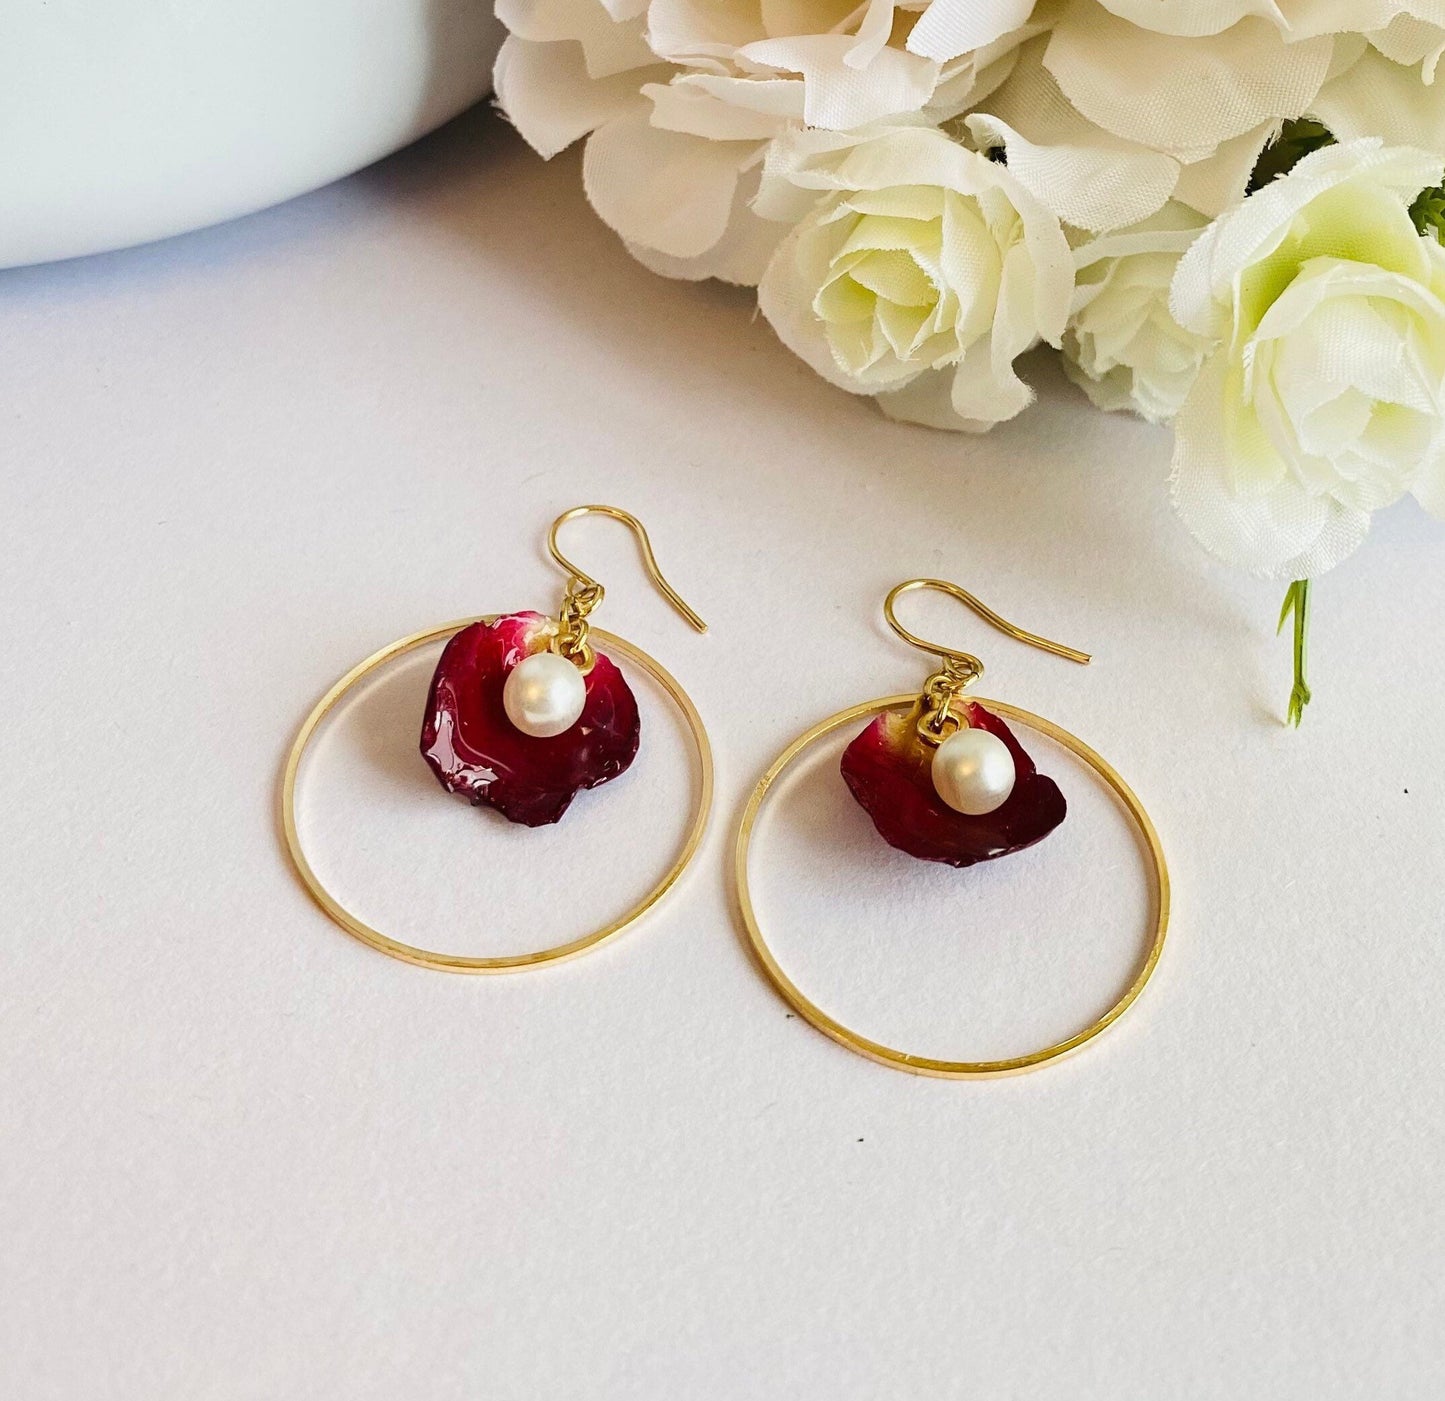 Real Flower｜Handmade Rose Peta Earrings l Real Dried Flower Circle Earring | Resin Floral Jewelry | Bridal Jewel Gifts For Her